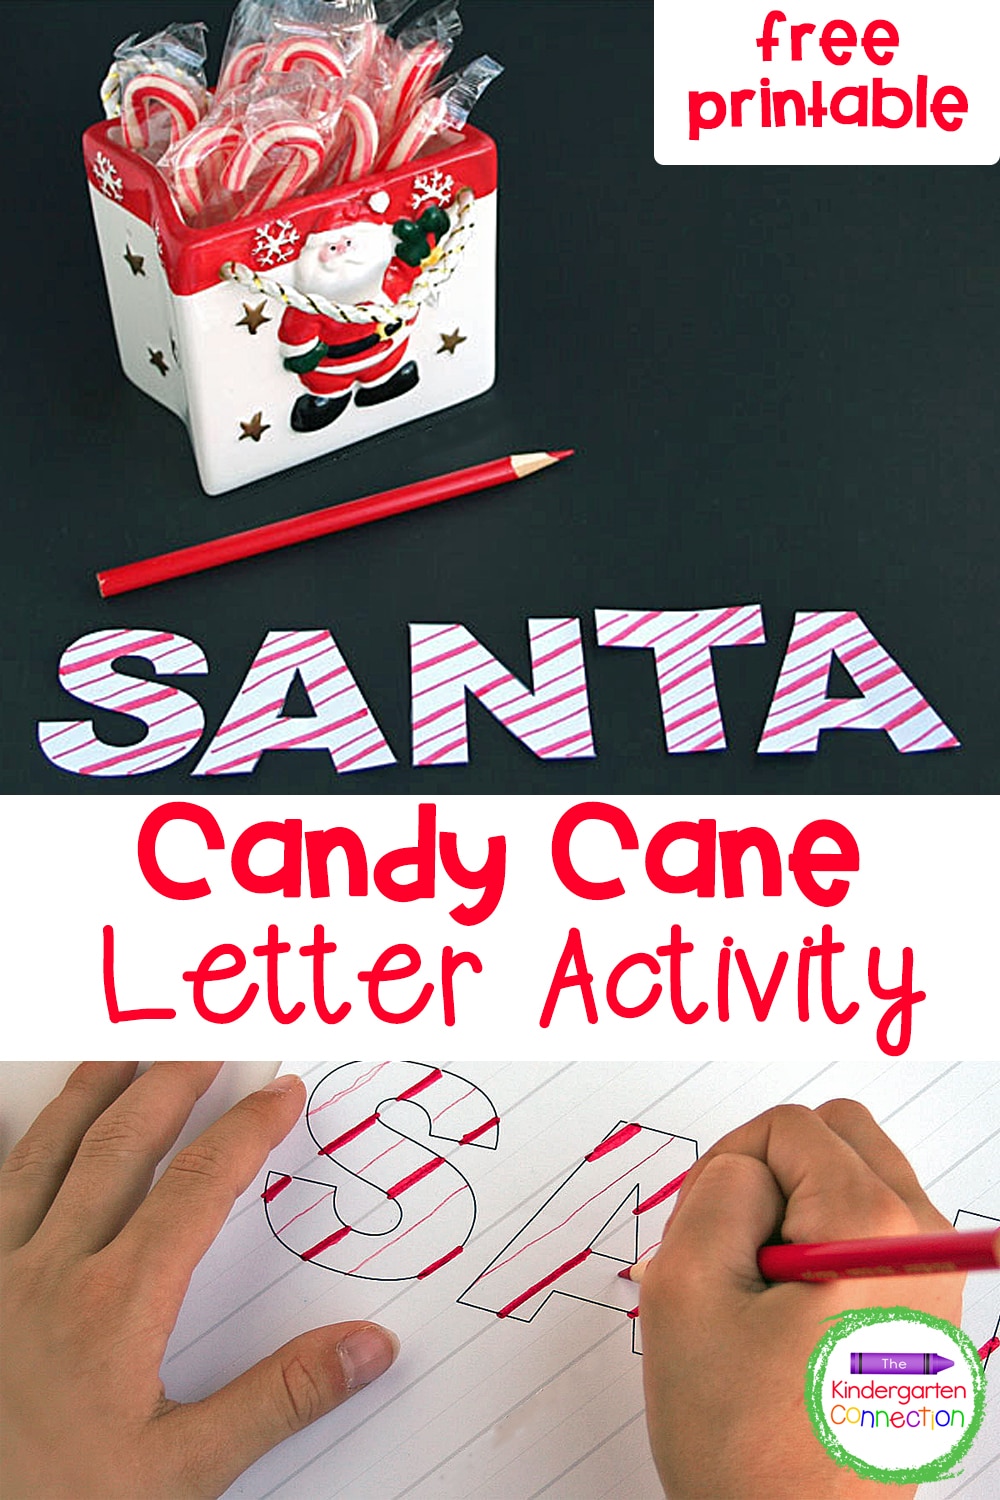 This candy cane letter activity is great for a Christmas writing activity. Use this activity to develop fine motor skills, patterning and letter recognition